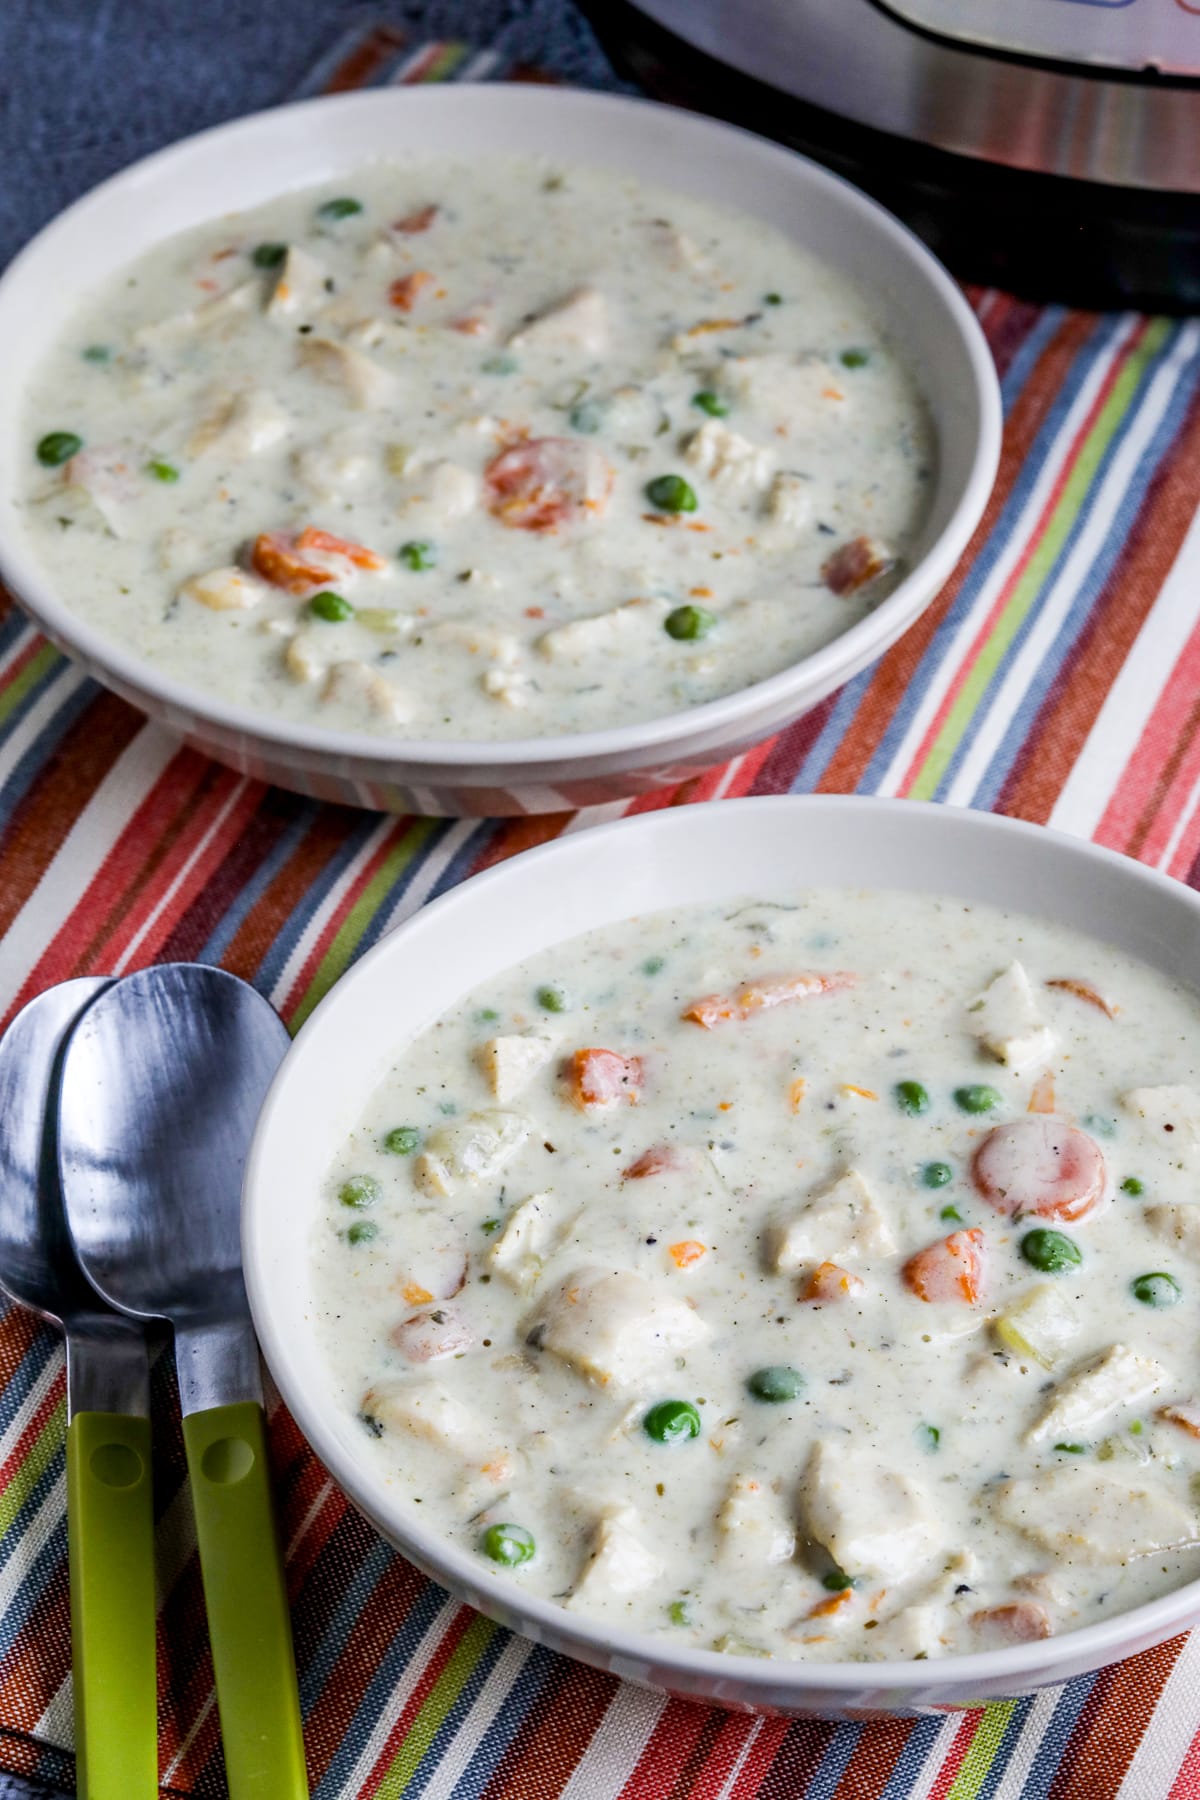 Instant Pot Chicken Pot Pie Soup shown in two serving bowls with Instant Pot in back.